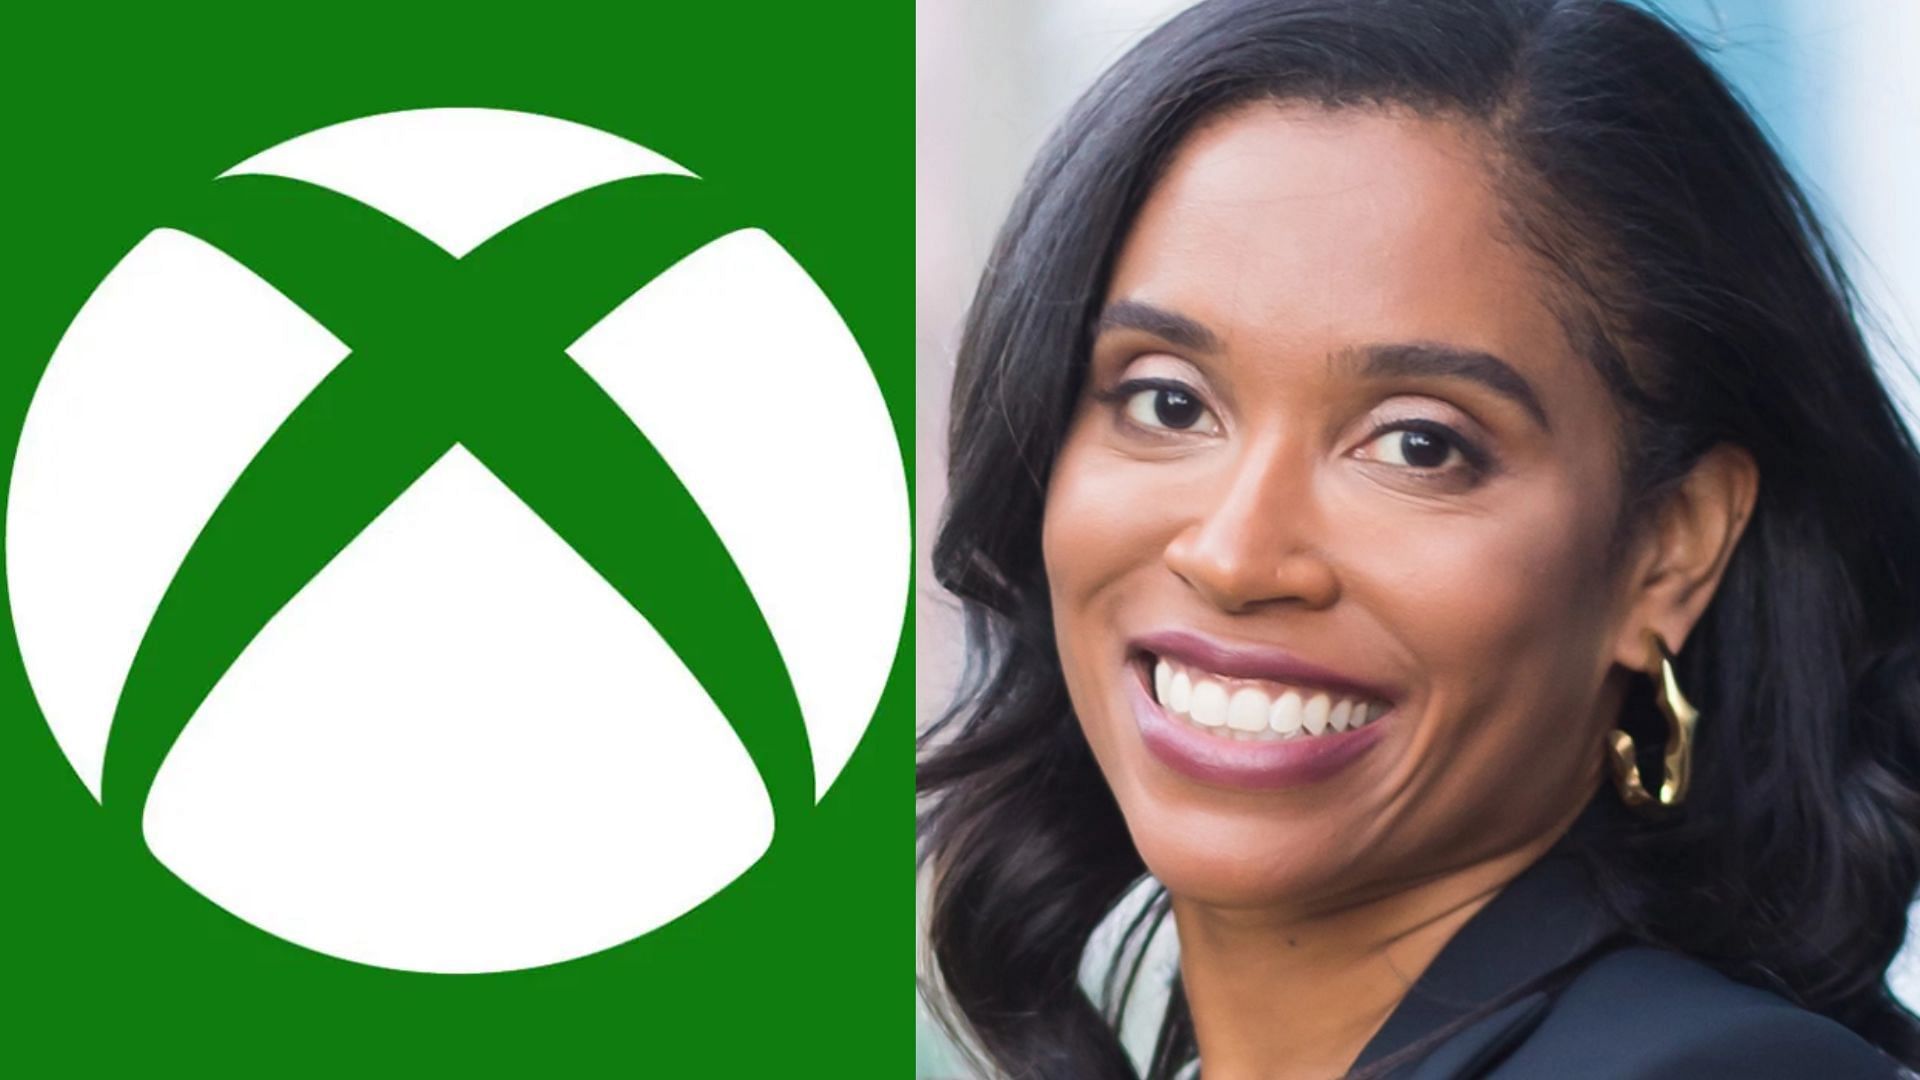 L-R) Corporate Vice President of Xbox, Sarah Bond, during the